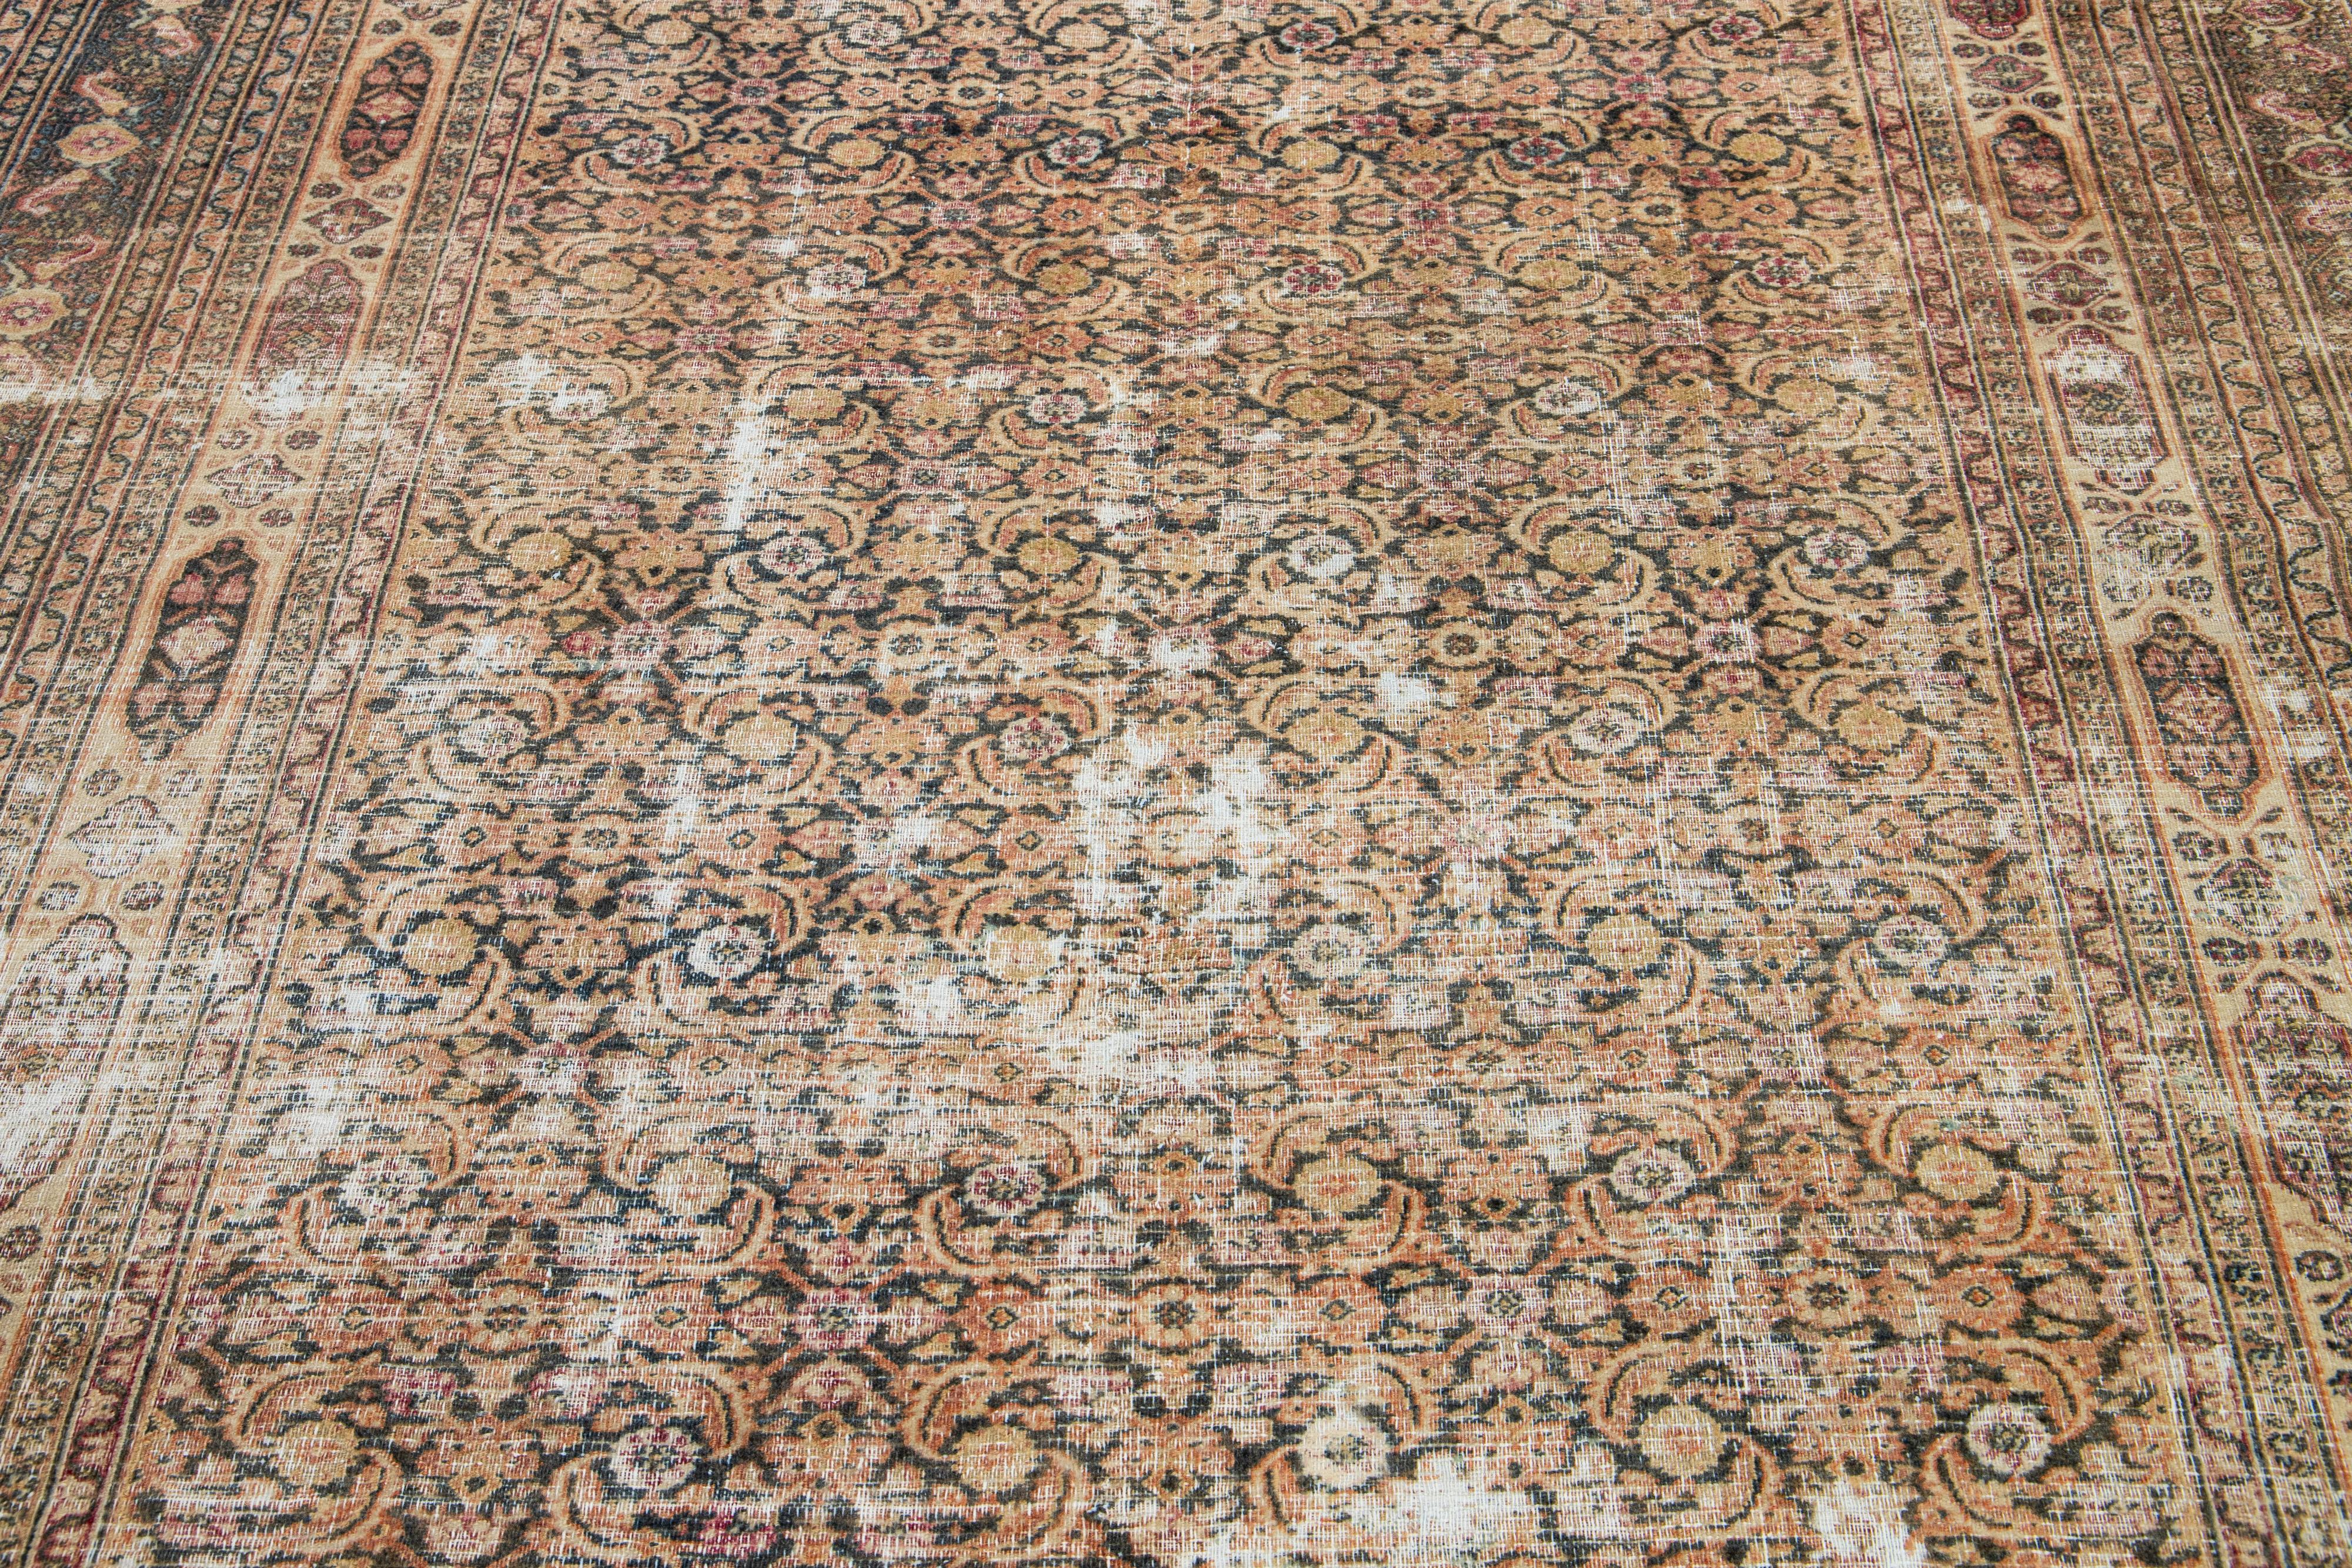  1900s Antique Wool Rug Persian Tabriz In Rust With Floral Pattern  For Sale 1